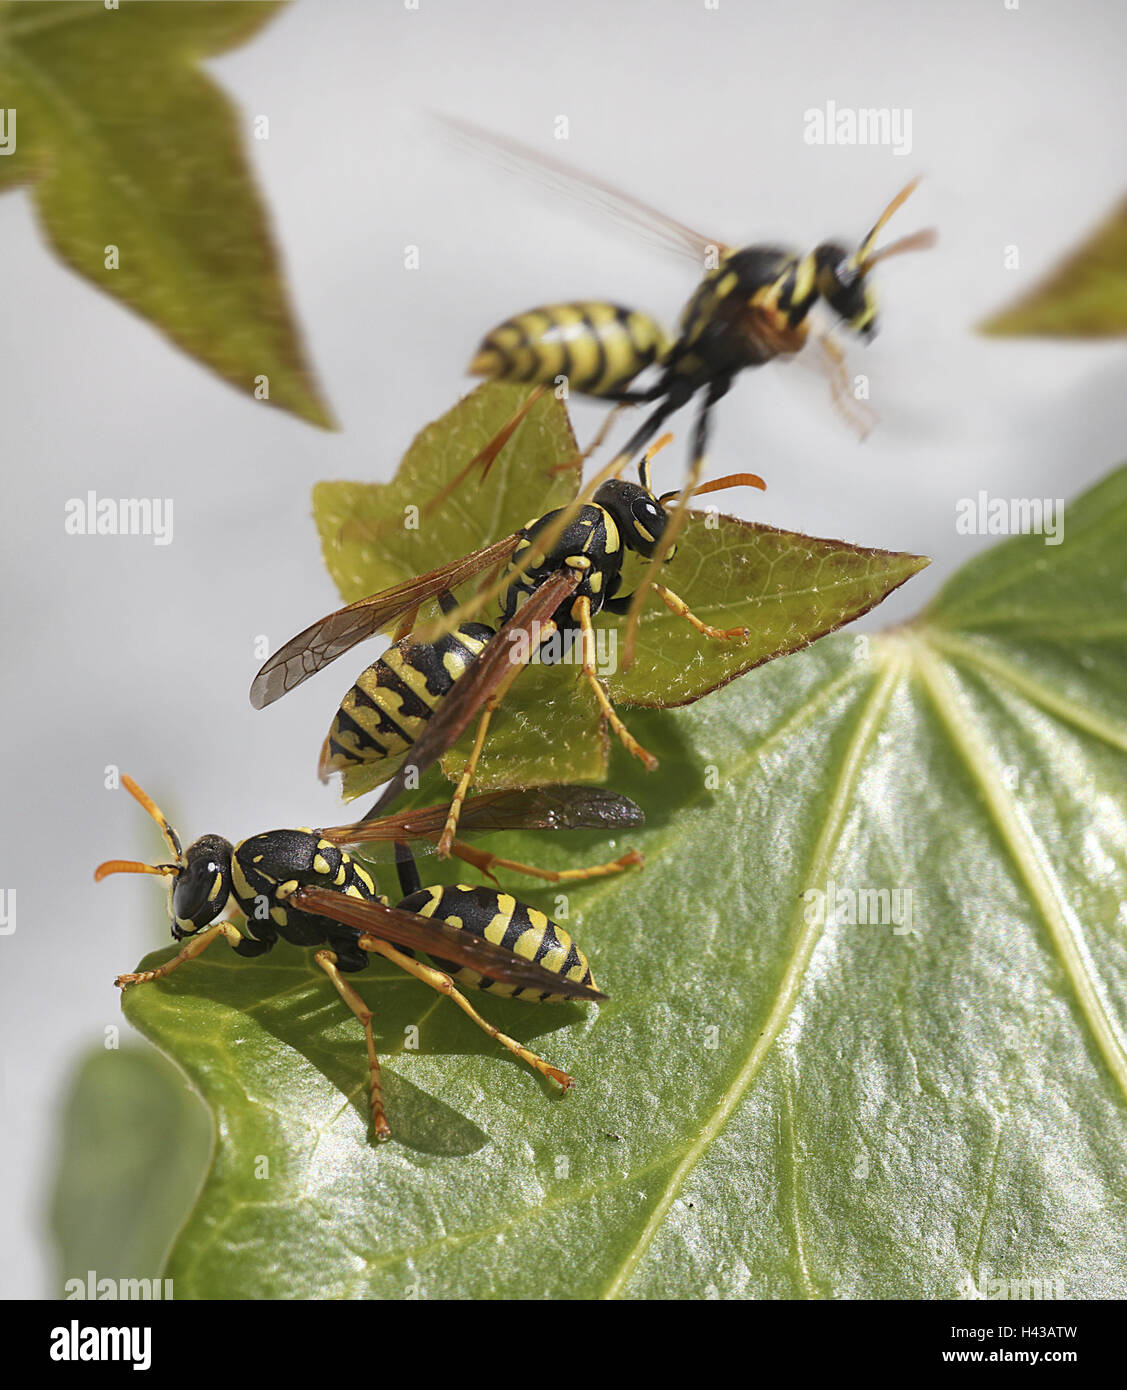 Leaves, Gallic field wasps, Polistes dominulus, wasps, detail, animals, insects, Majorca, the Balearic Islands, Spain, three, pleated wasps, hymenopteras, ivy, Stock Photo